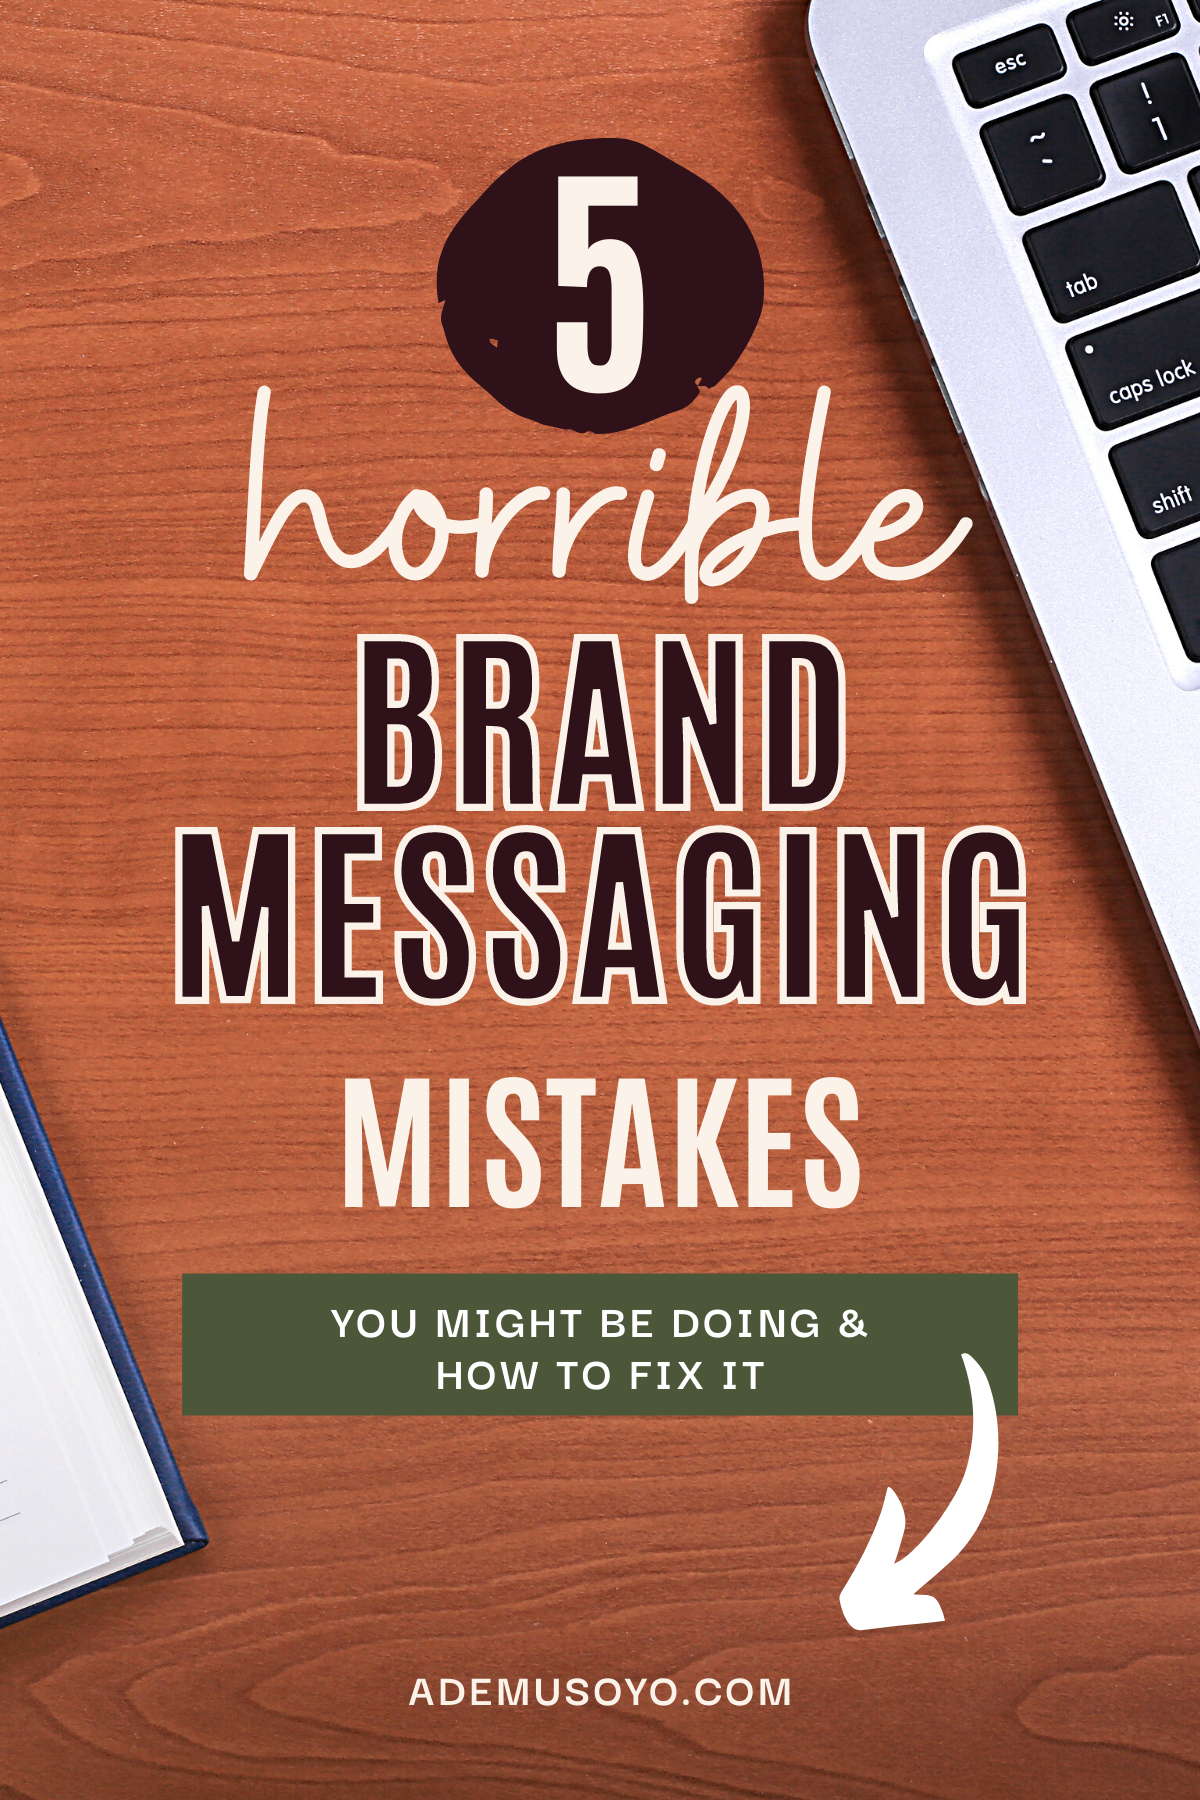 Brand Messaging Mistakes: Why Your Dream Clients Aren't Buying, common branding mistakes, improve brand messaging branding mistakes examples, clarify brand mesage